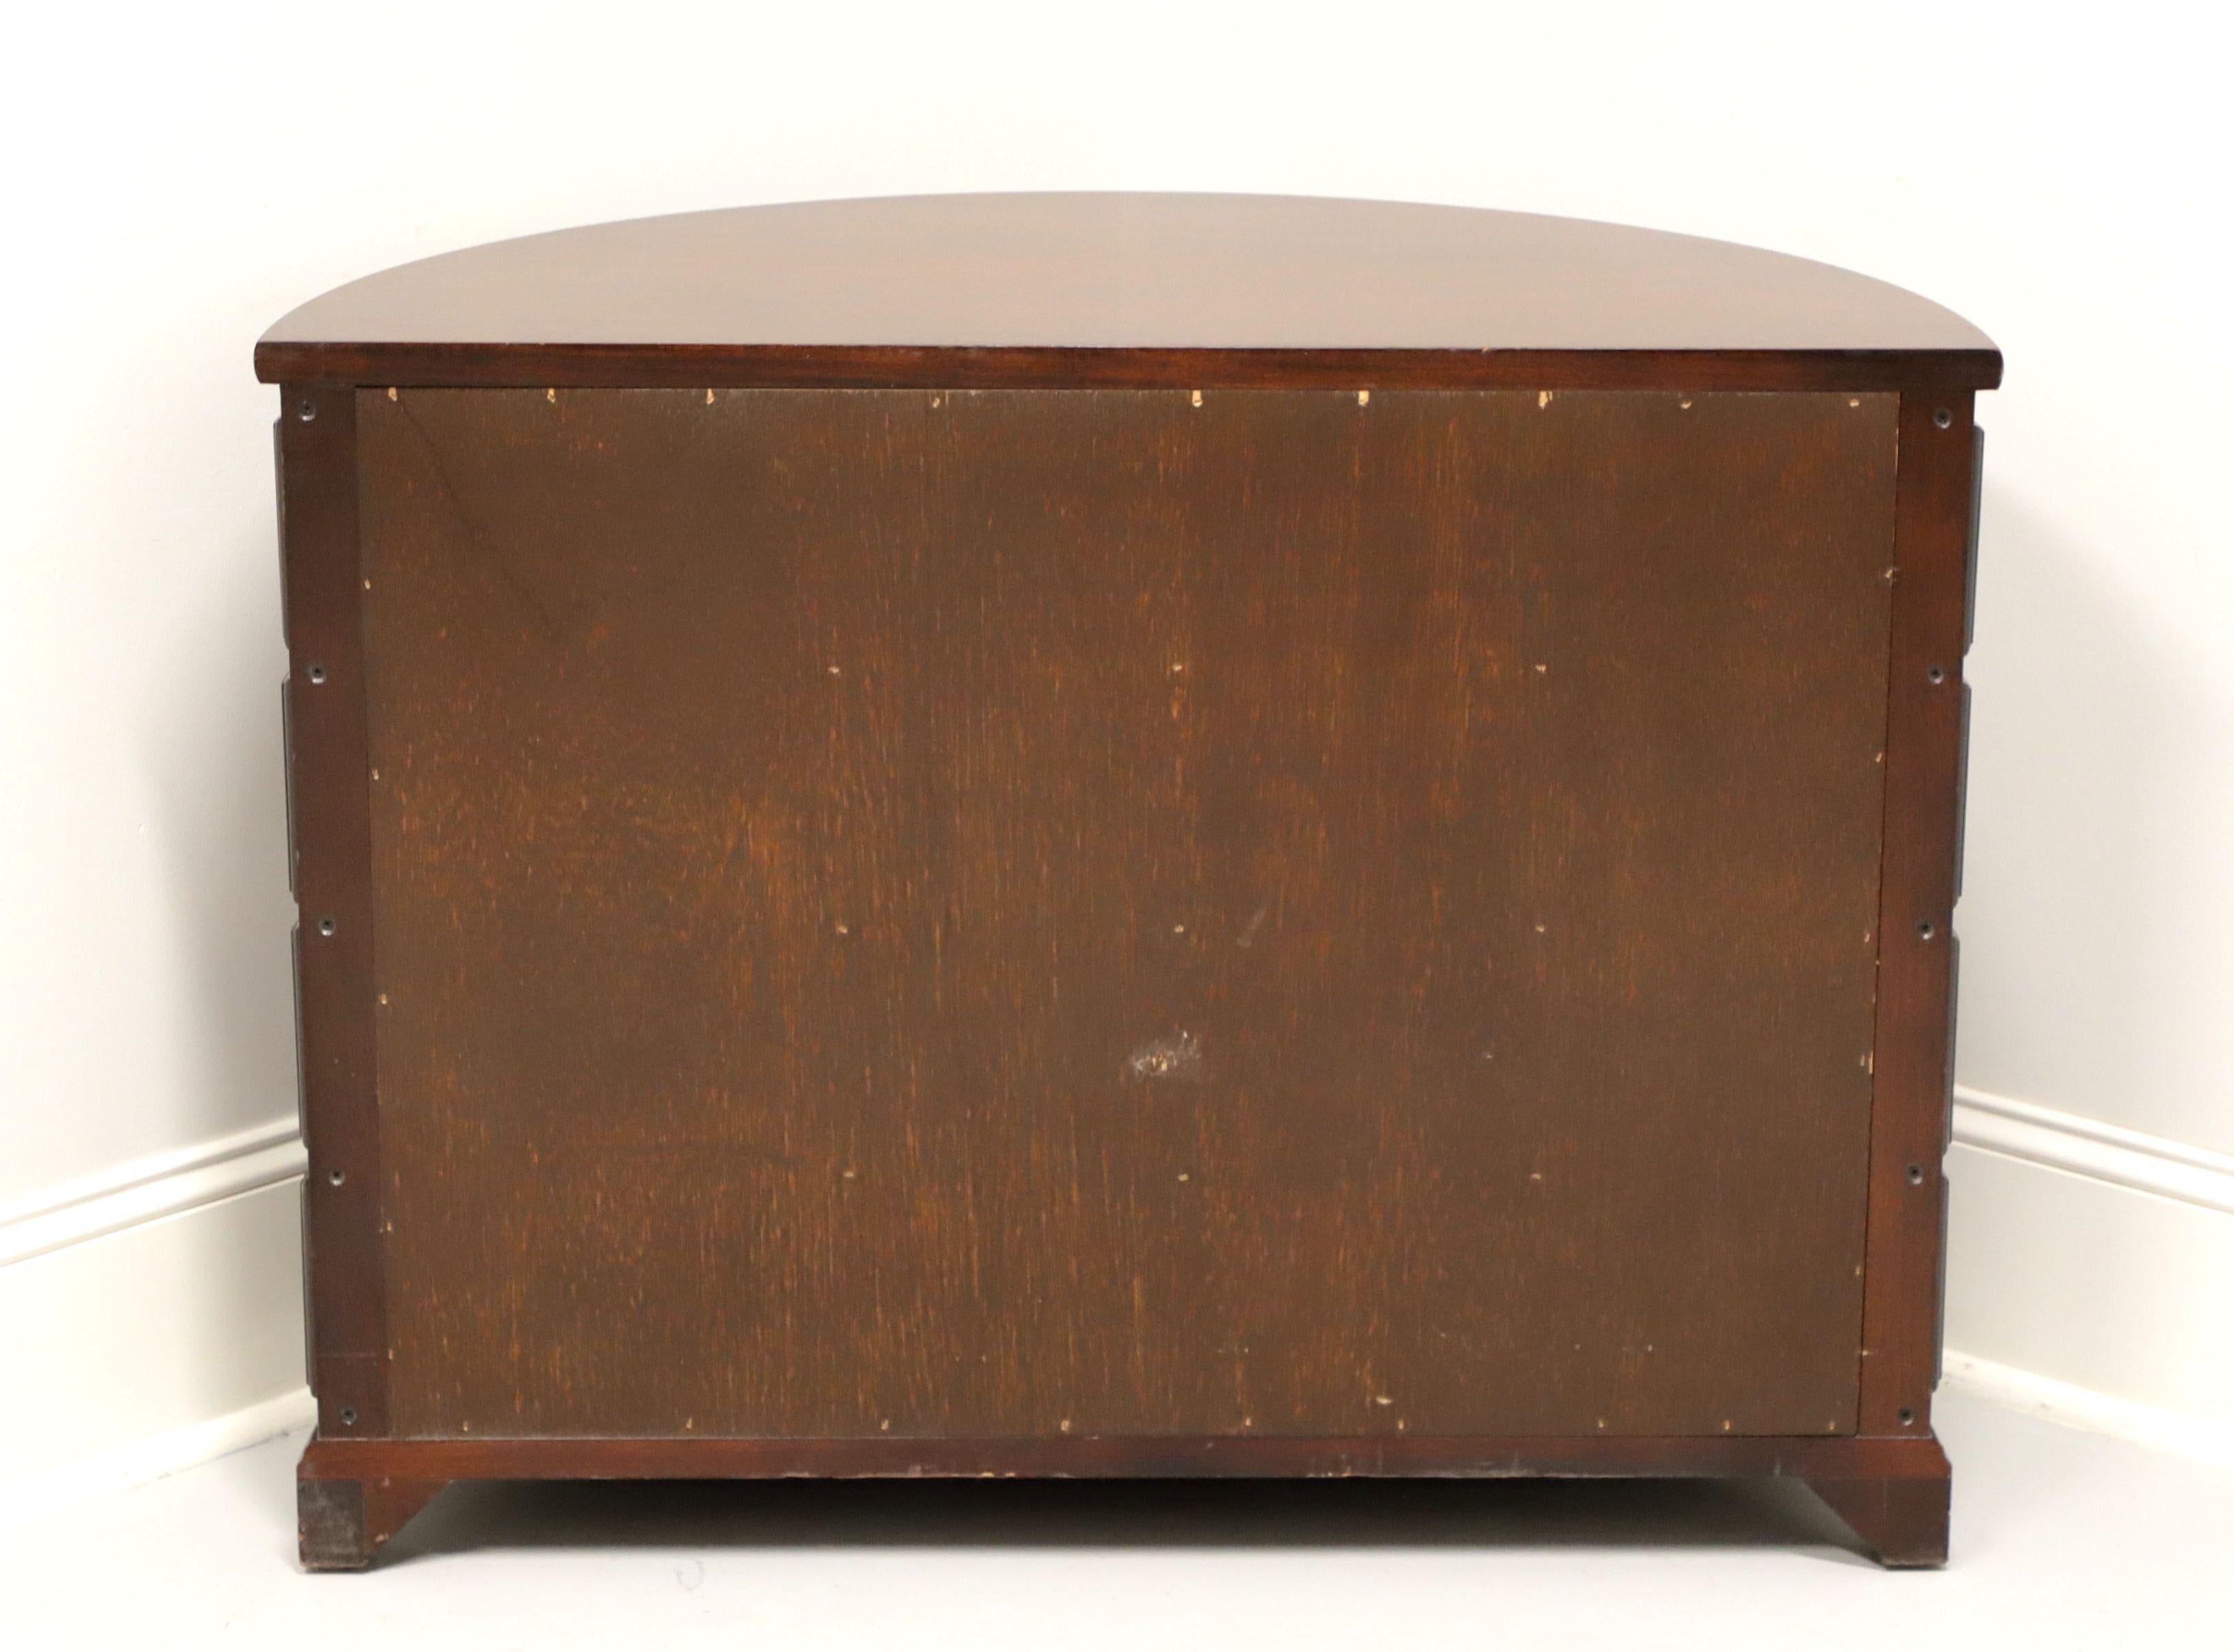 MADISON SQUARE Mahogany Chippendale Style Demilune Commode Chest - B In Good Condition For Sale In Charlotte, NC